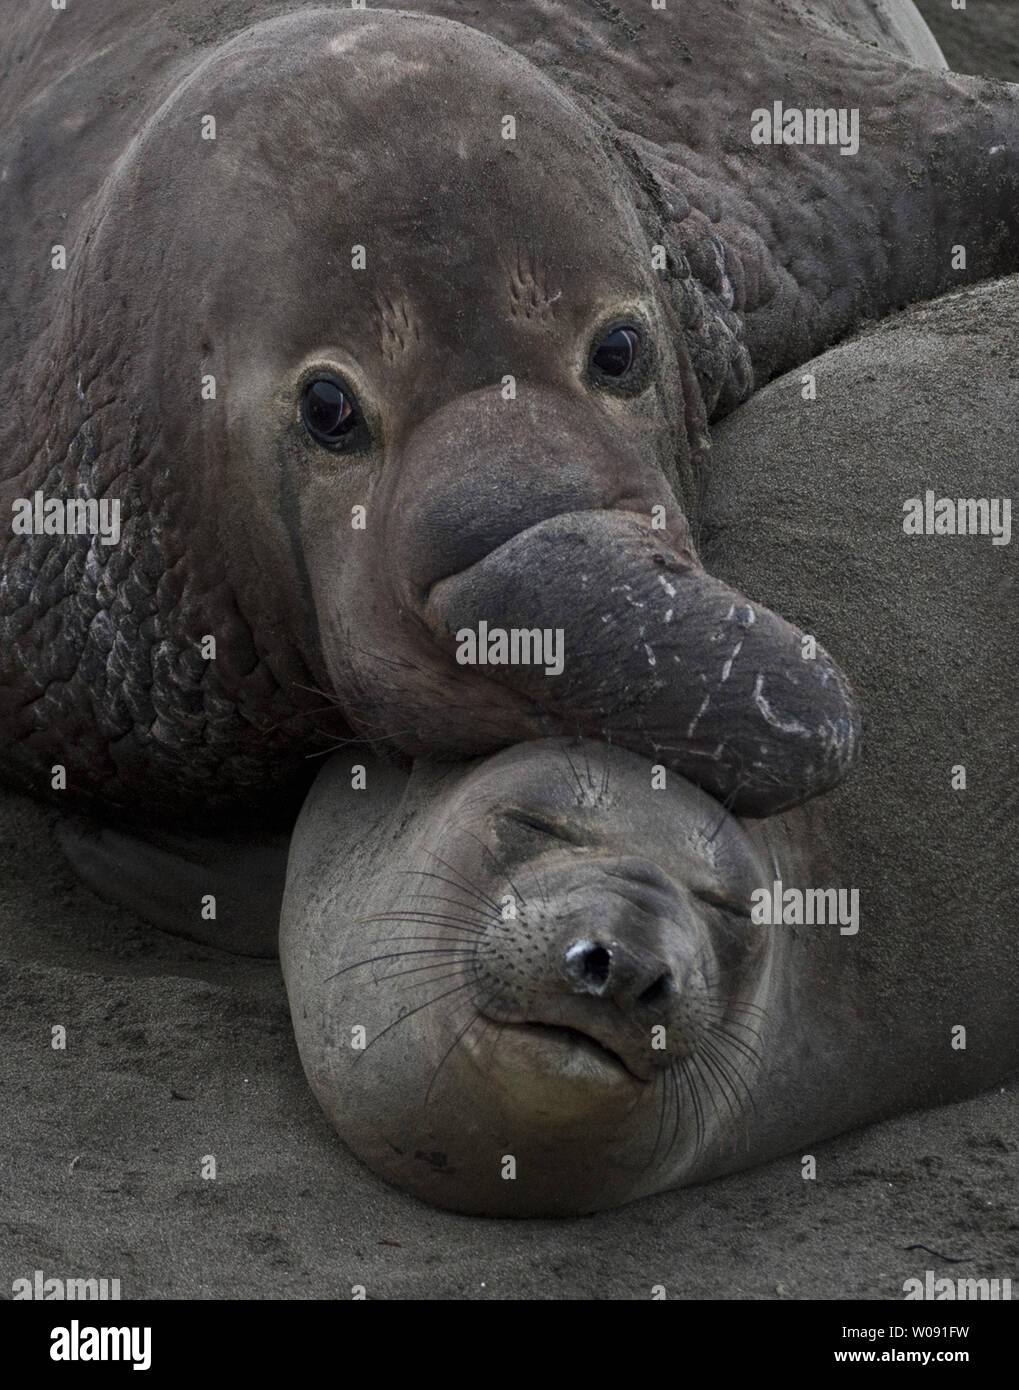 A female northern elephant seal submits as she is mounted by a dominant male on the beach in San Simeon, California on February 19, 2015. The males weigh up to 5,000 pounds and can have scores of females in their harem.   Photo by Terry Schmitt/UPI Stock Photo